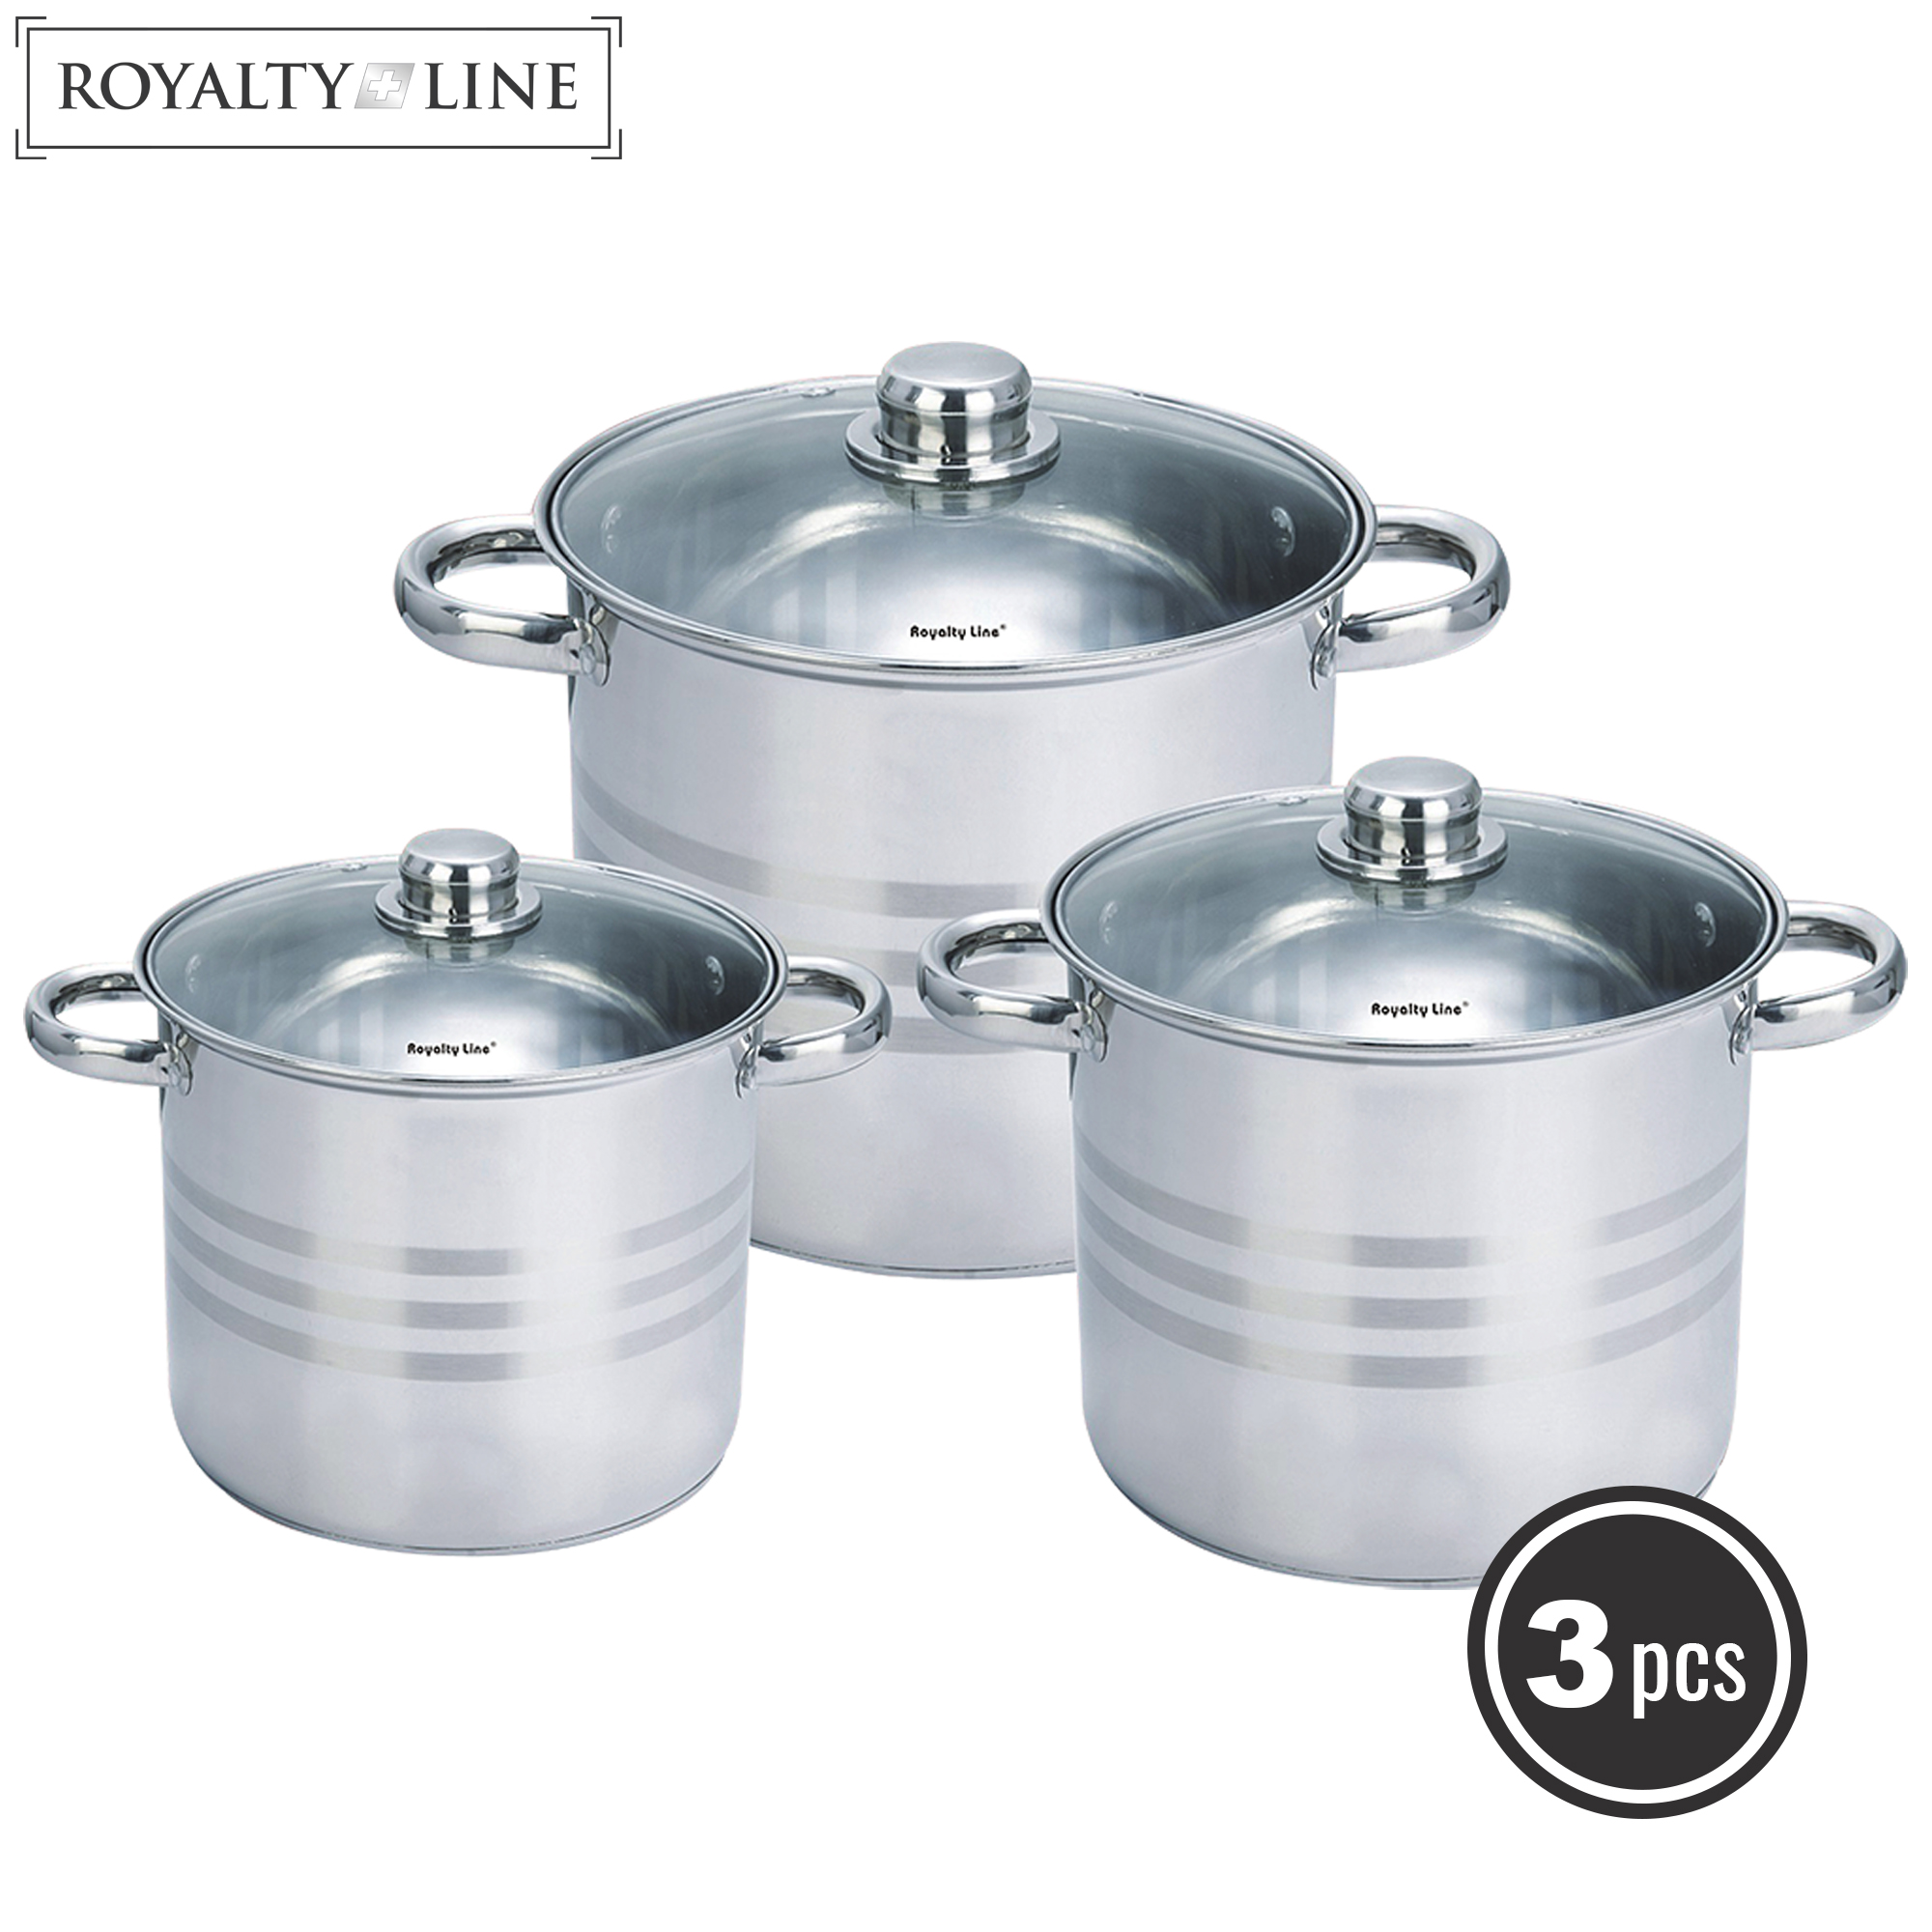 Royalty Line 6 Pieces Stainless Steel Pots Set with Glass Lids